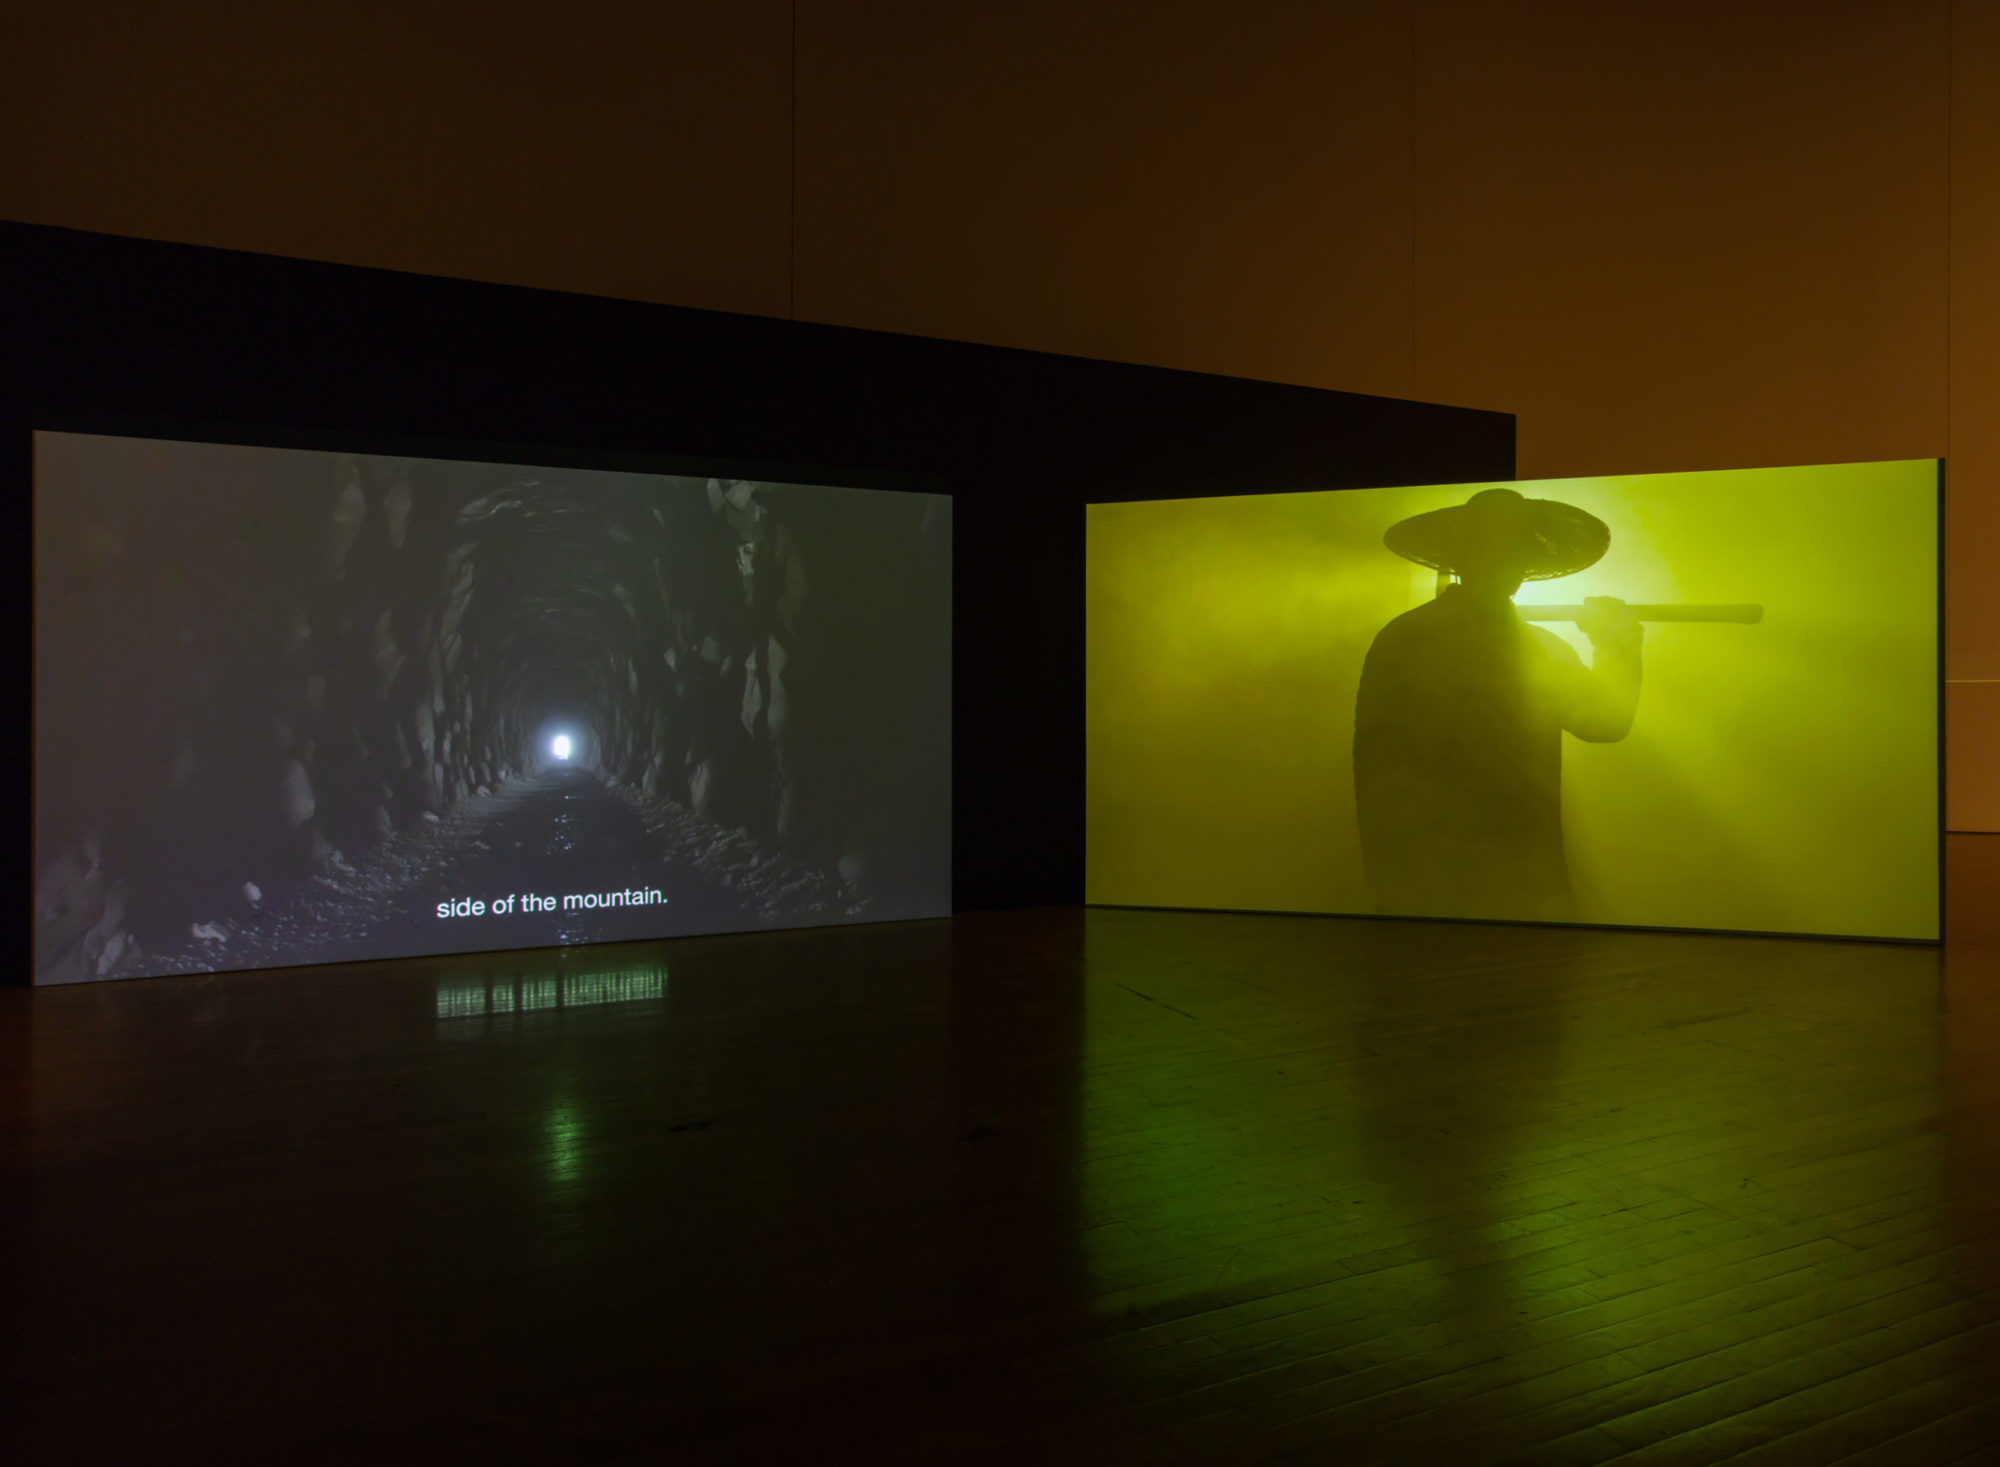 An installation view of Kenneth Tam's Silent Spikes at the Queen's Museum. Two screens are in view. The screen on the left is a view through a cave with a light at the end. The text at the bottom reads 